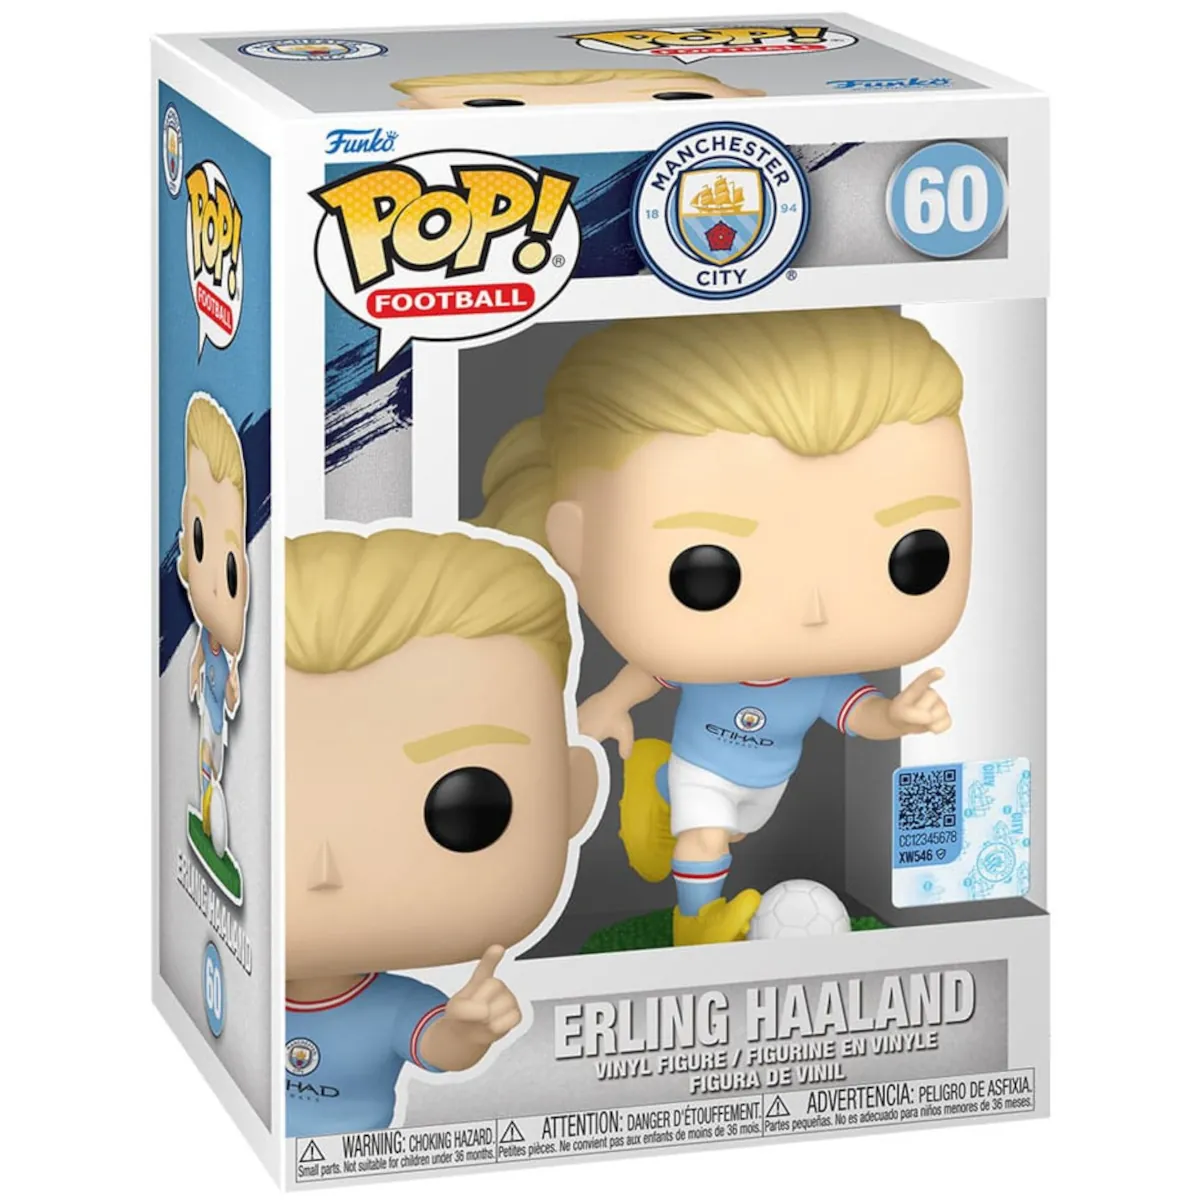 FK75113 Funko Pop! Football - Manchester City FC. - Erling Haaland Collectable Vinyl Figure Box Front